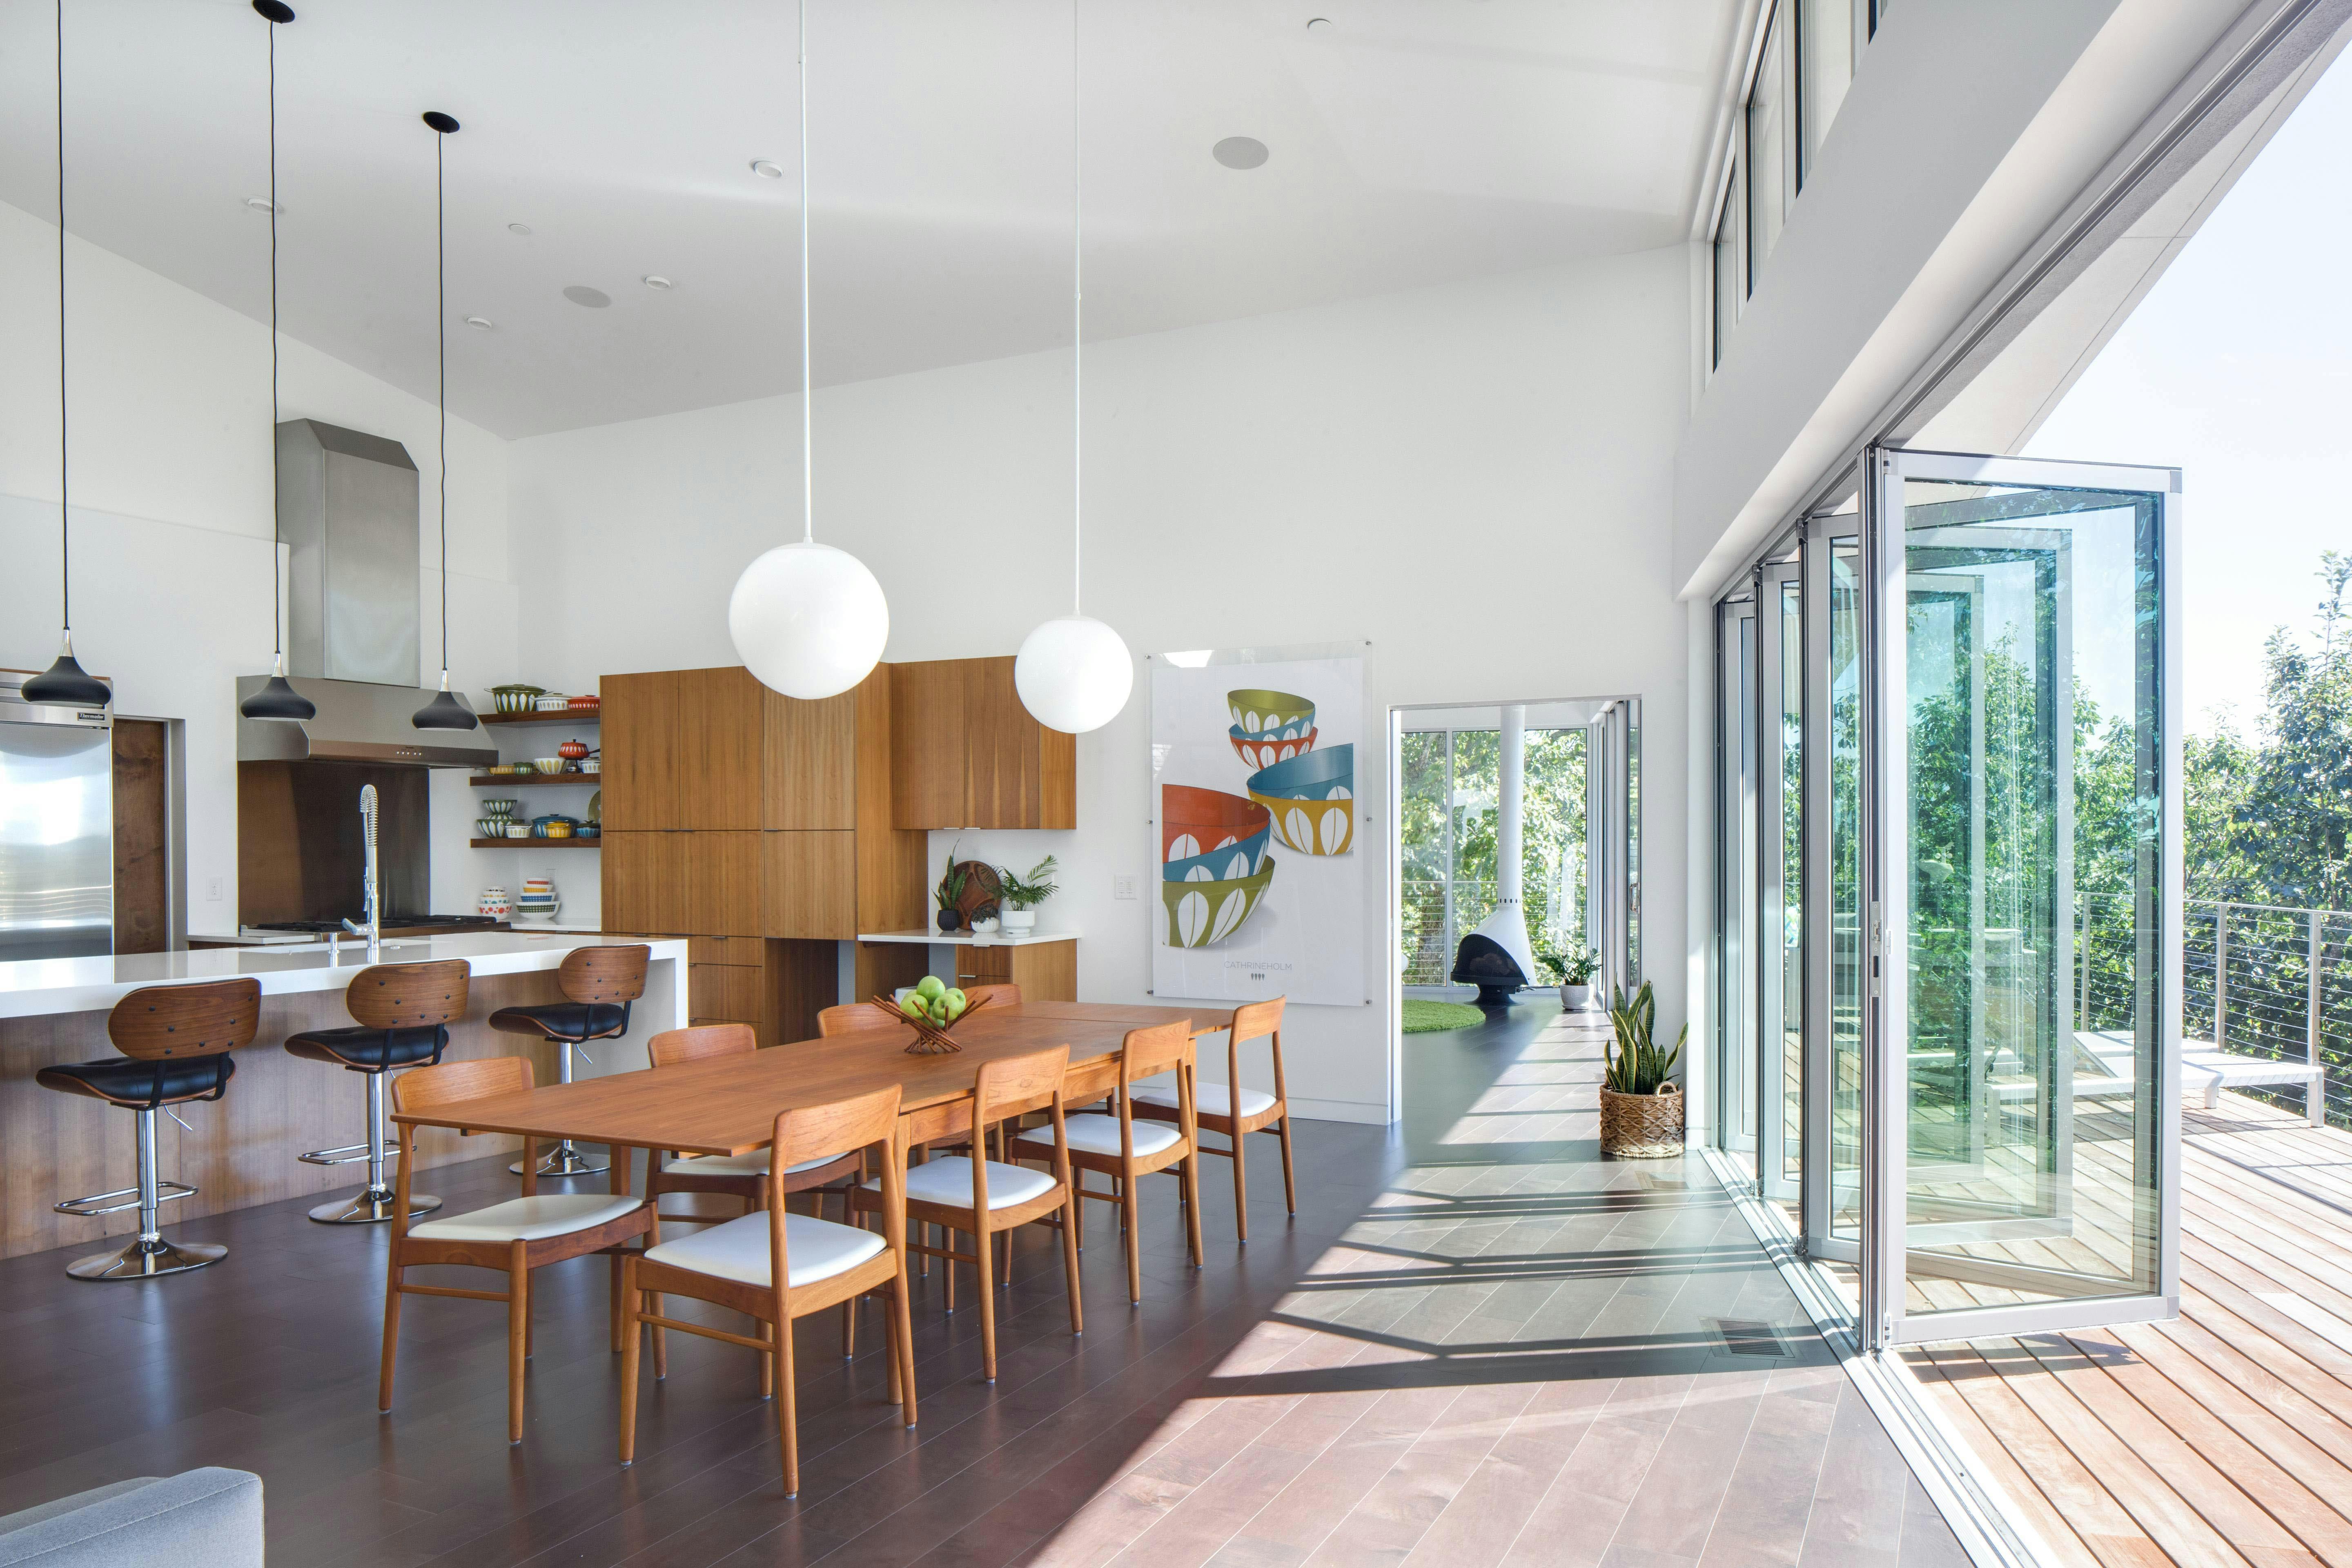 renovated-mid-century-modern-interior-with-opening-glass-walls